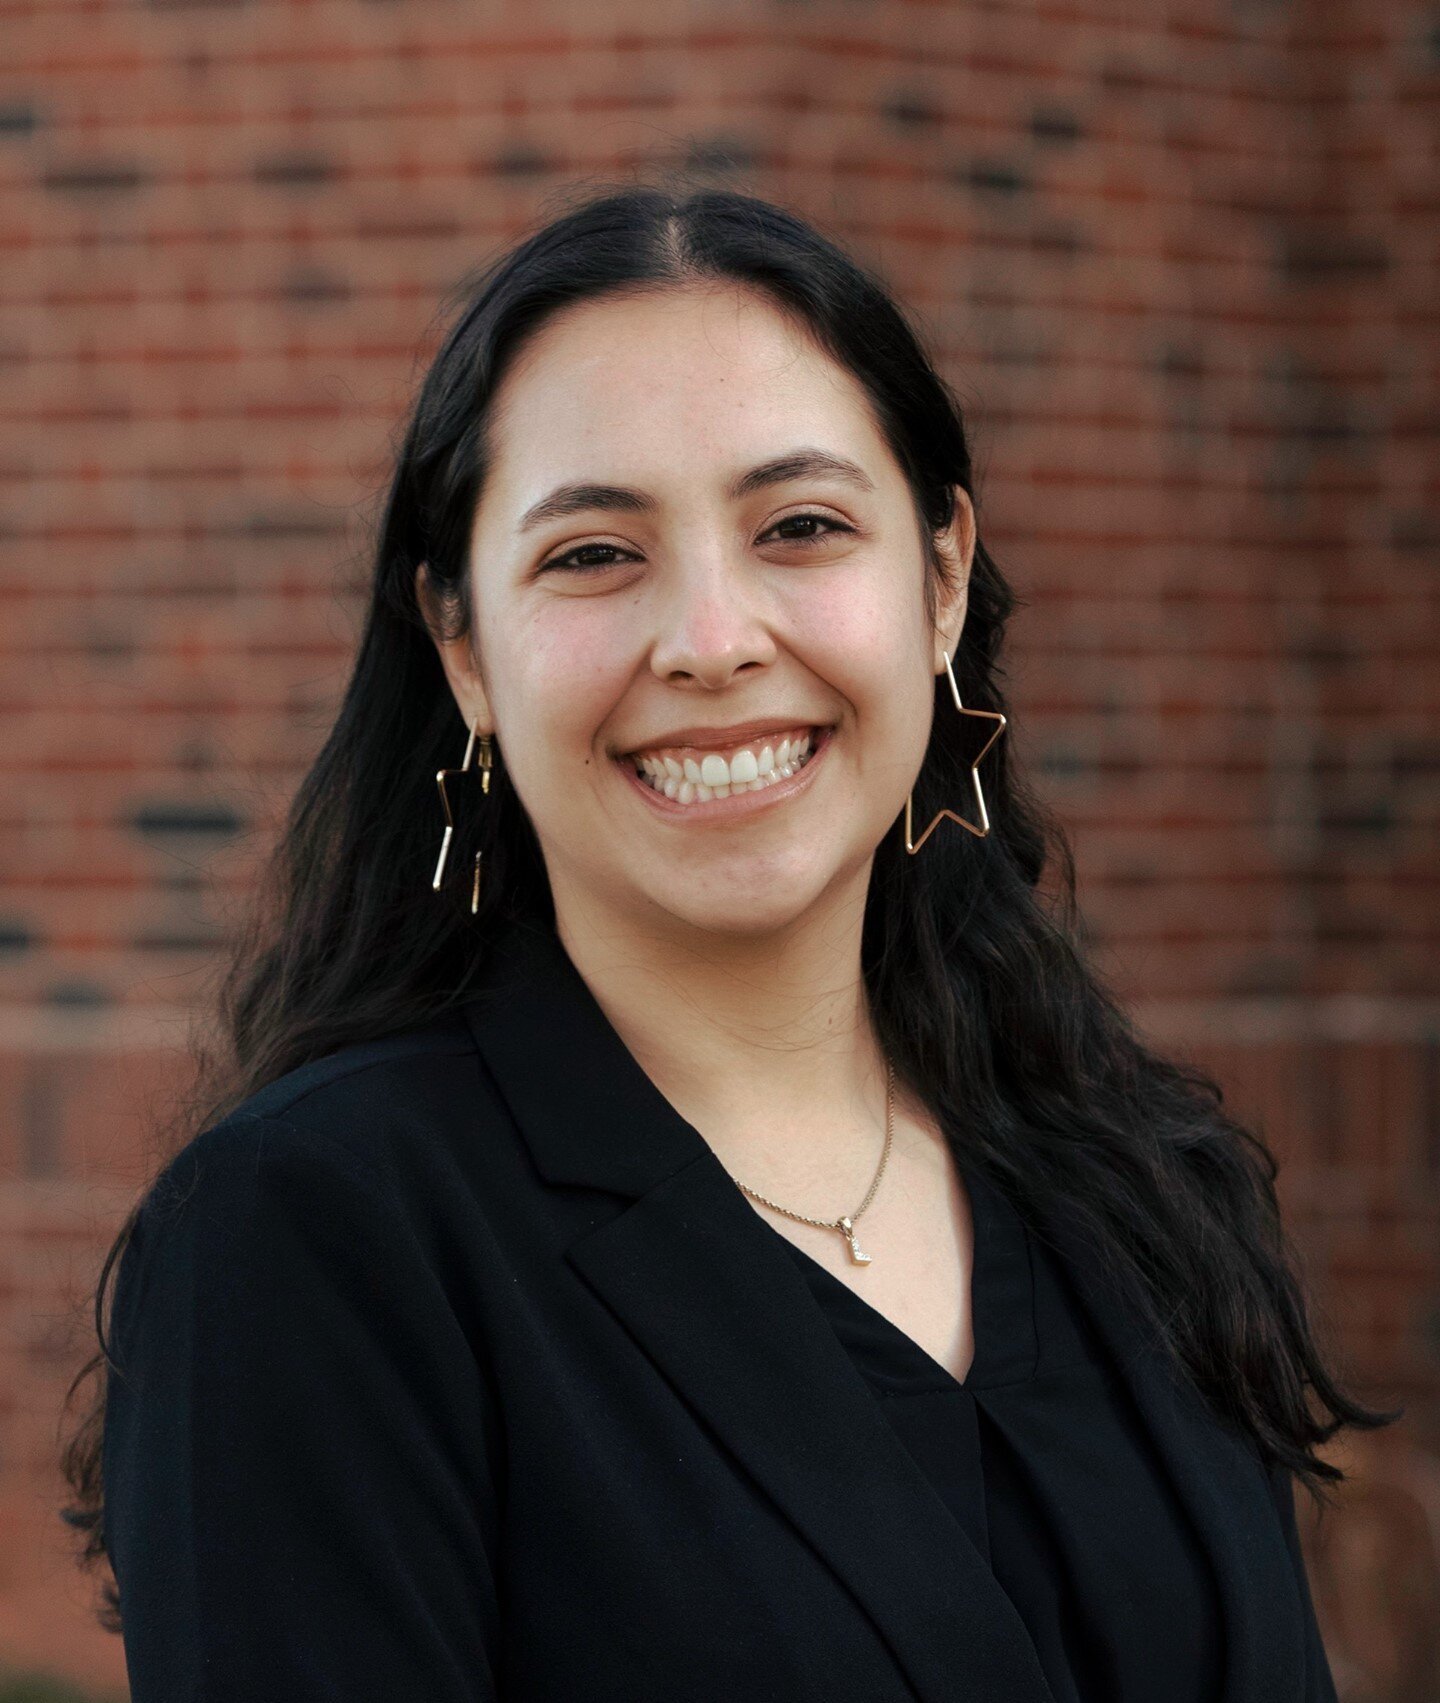 Alamance Achieves is thrilled to welcome our 2021-2022 Elon Service Year Fellow, Lucia Lozano Robledo! 

Read a little bit about Lucia below: 
Lucia Lozano Robledo is a recent Elon University graduate originally from Bogota, Colombia, and has been li